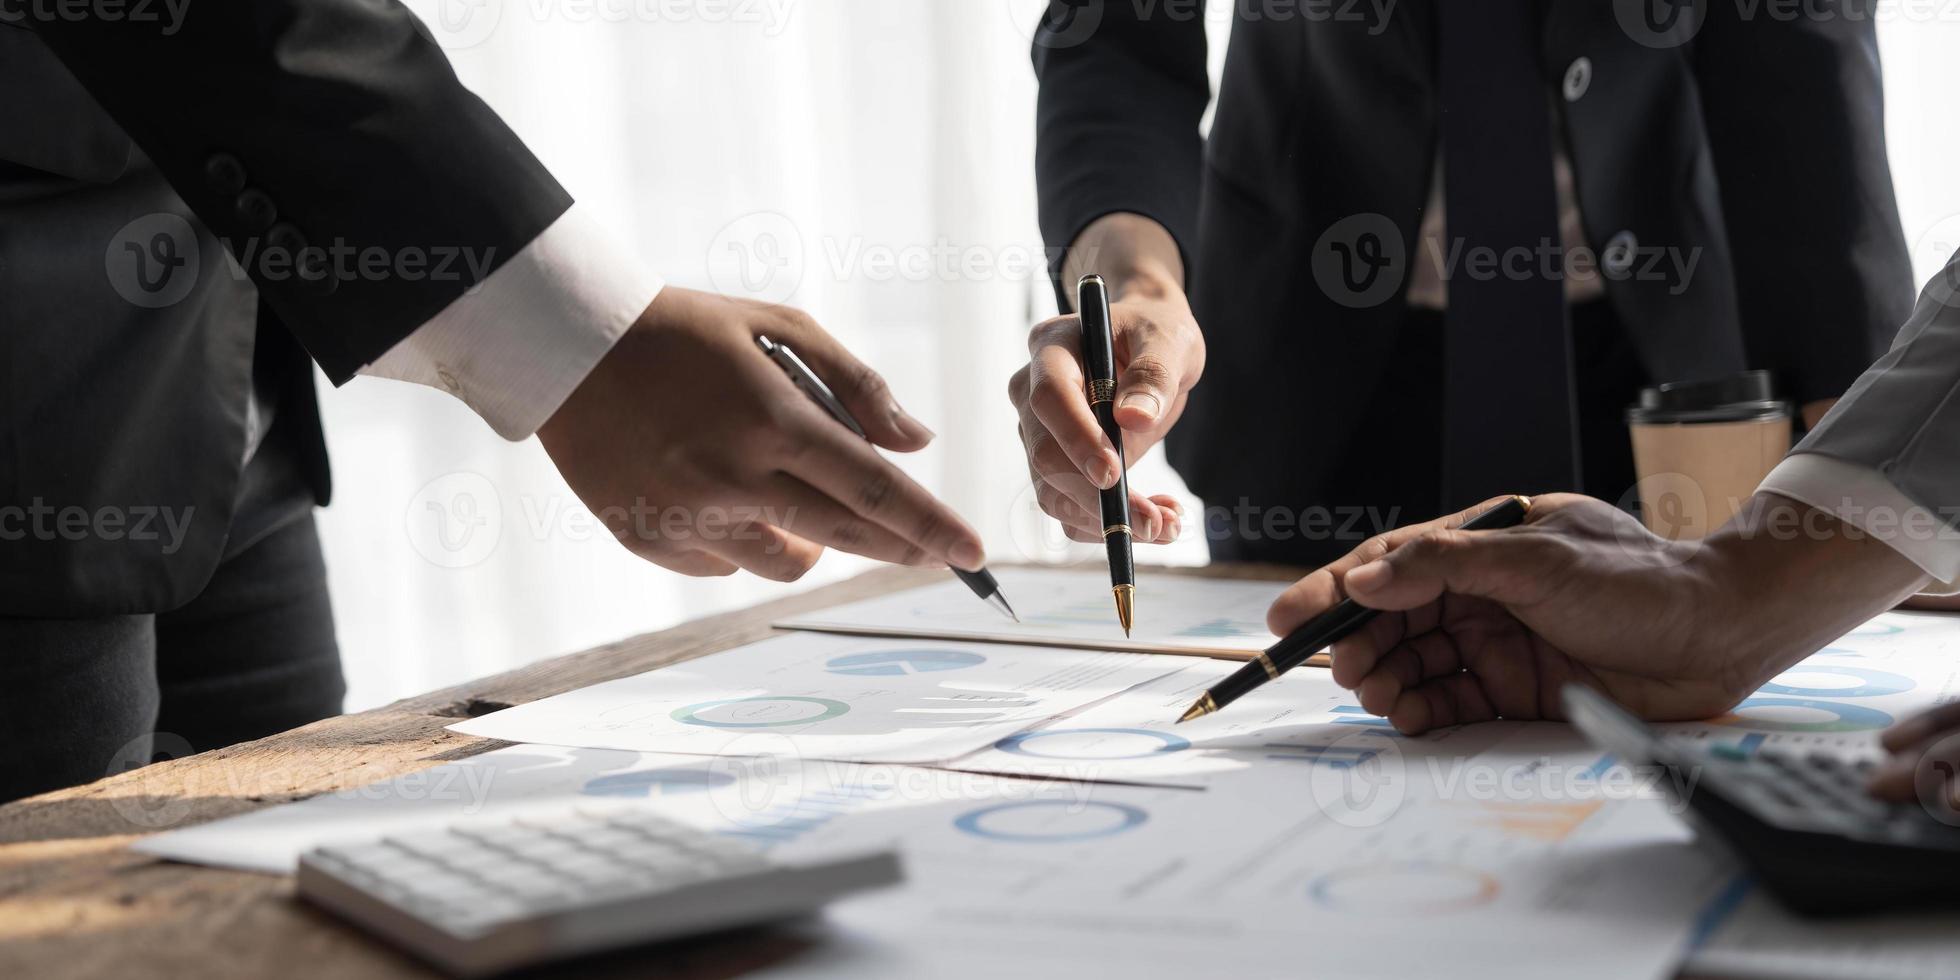 Business People Meeting using laptop computer,calculator,notebook,stock market chart paper for analysis Plans to improve quality next month. Conference Discussion Corporate Concept photo